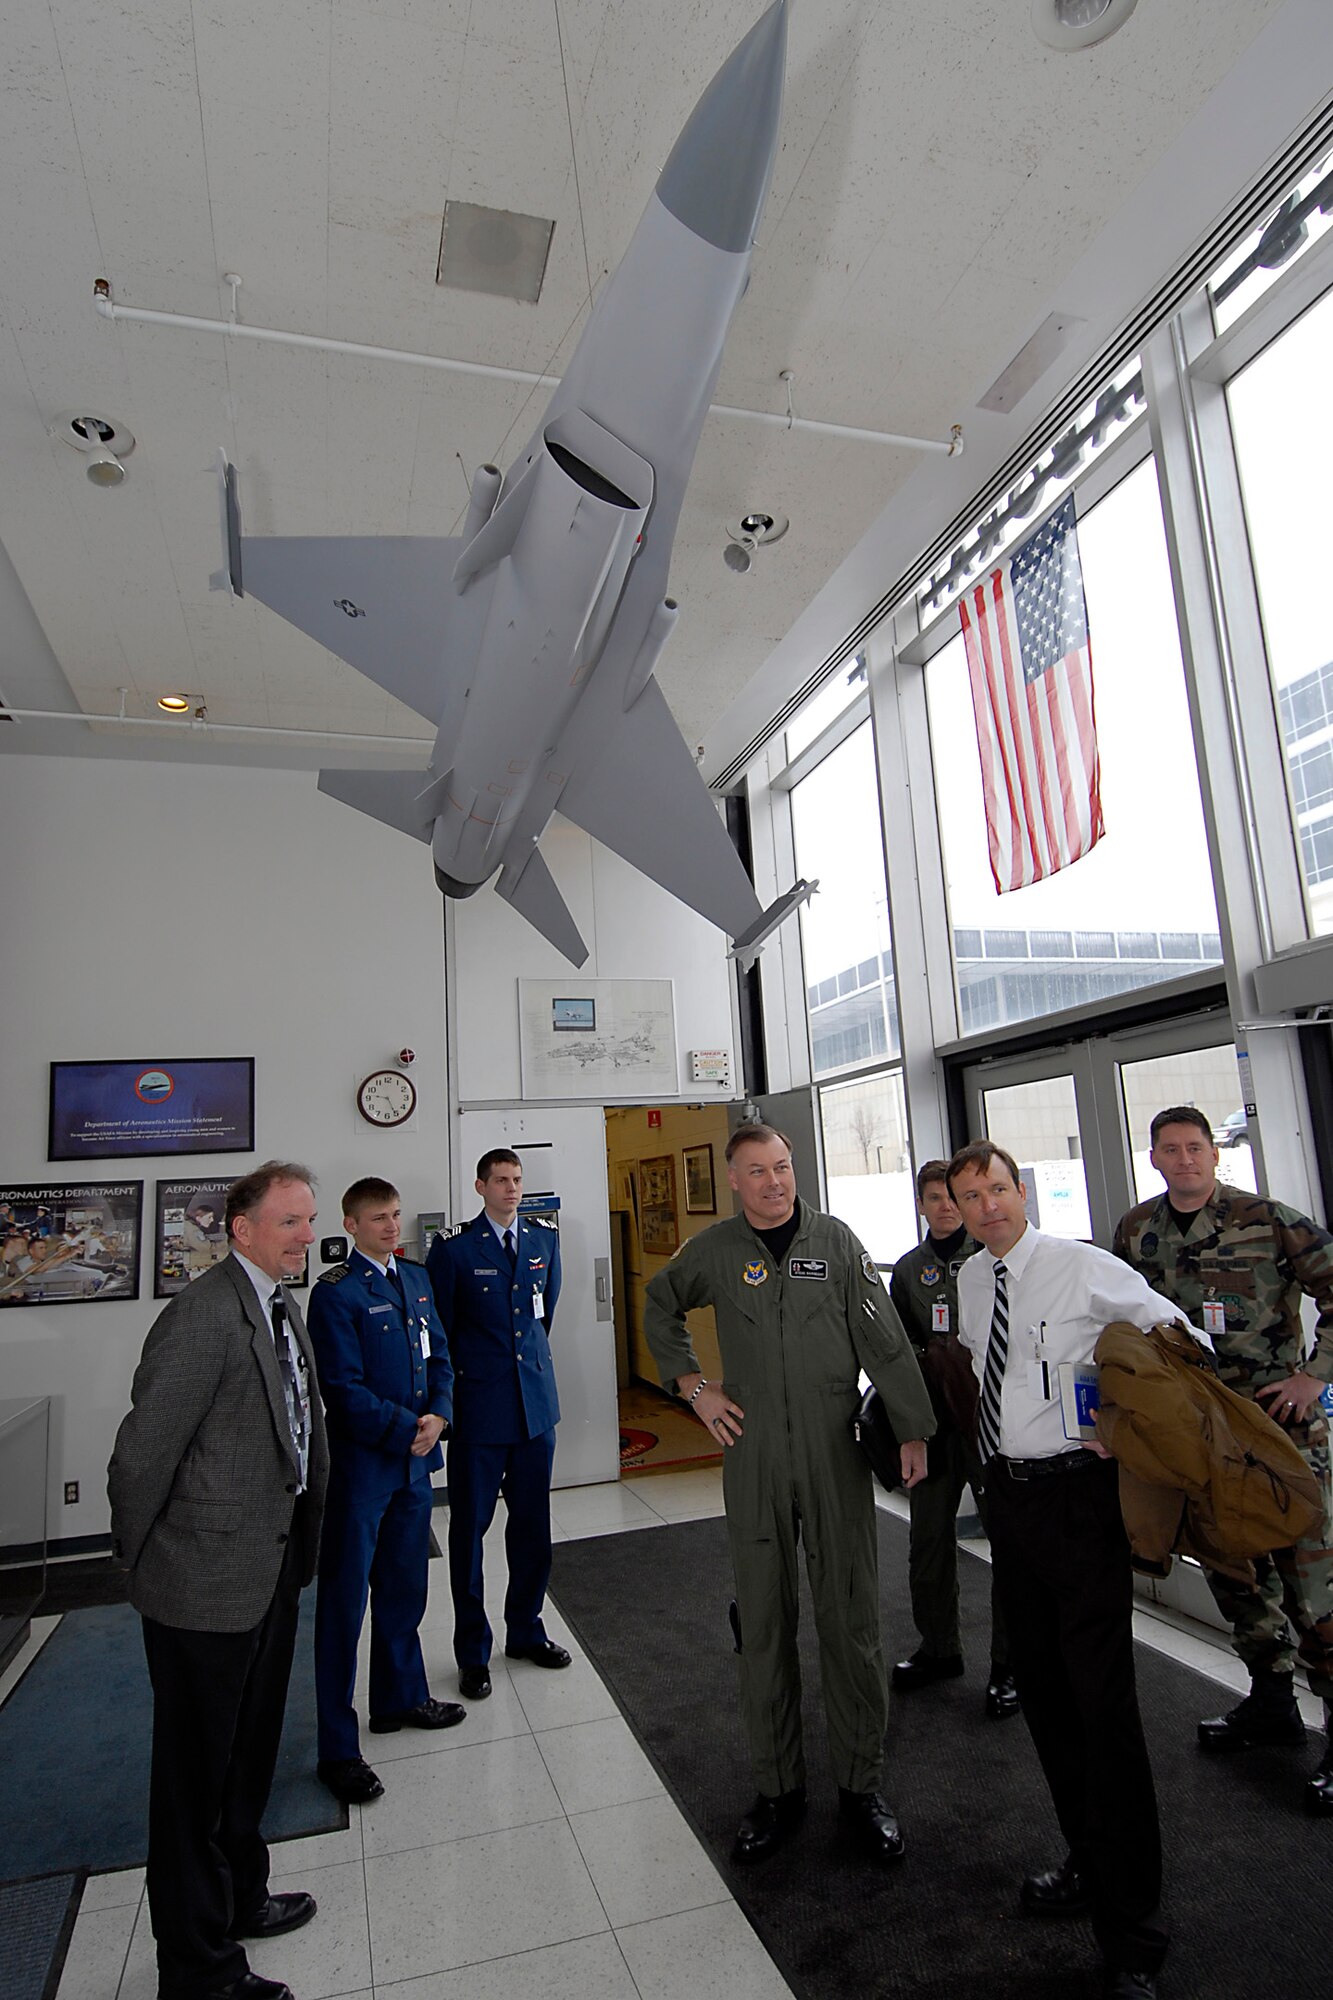 (Middle) Maj. Gen. Stephen T. Sargeant, Air Force Operational Test and Evaluation Center Commander, is greeted by U.S. Air Force Academy faculty members and cadets during a March 17, 2008 visit that included the formal signing of a memorandum of agreement between AFOTEC and the USAFA creating a comprehensive mentoring program to assist Academy cadets during their academic and professional development.